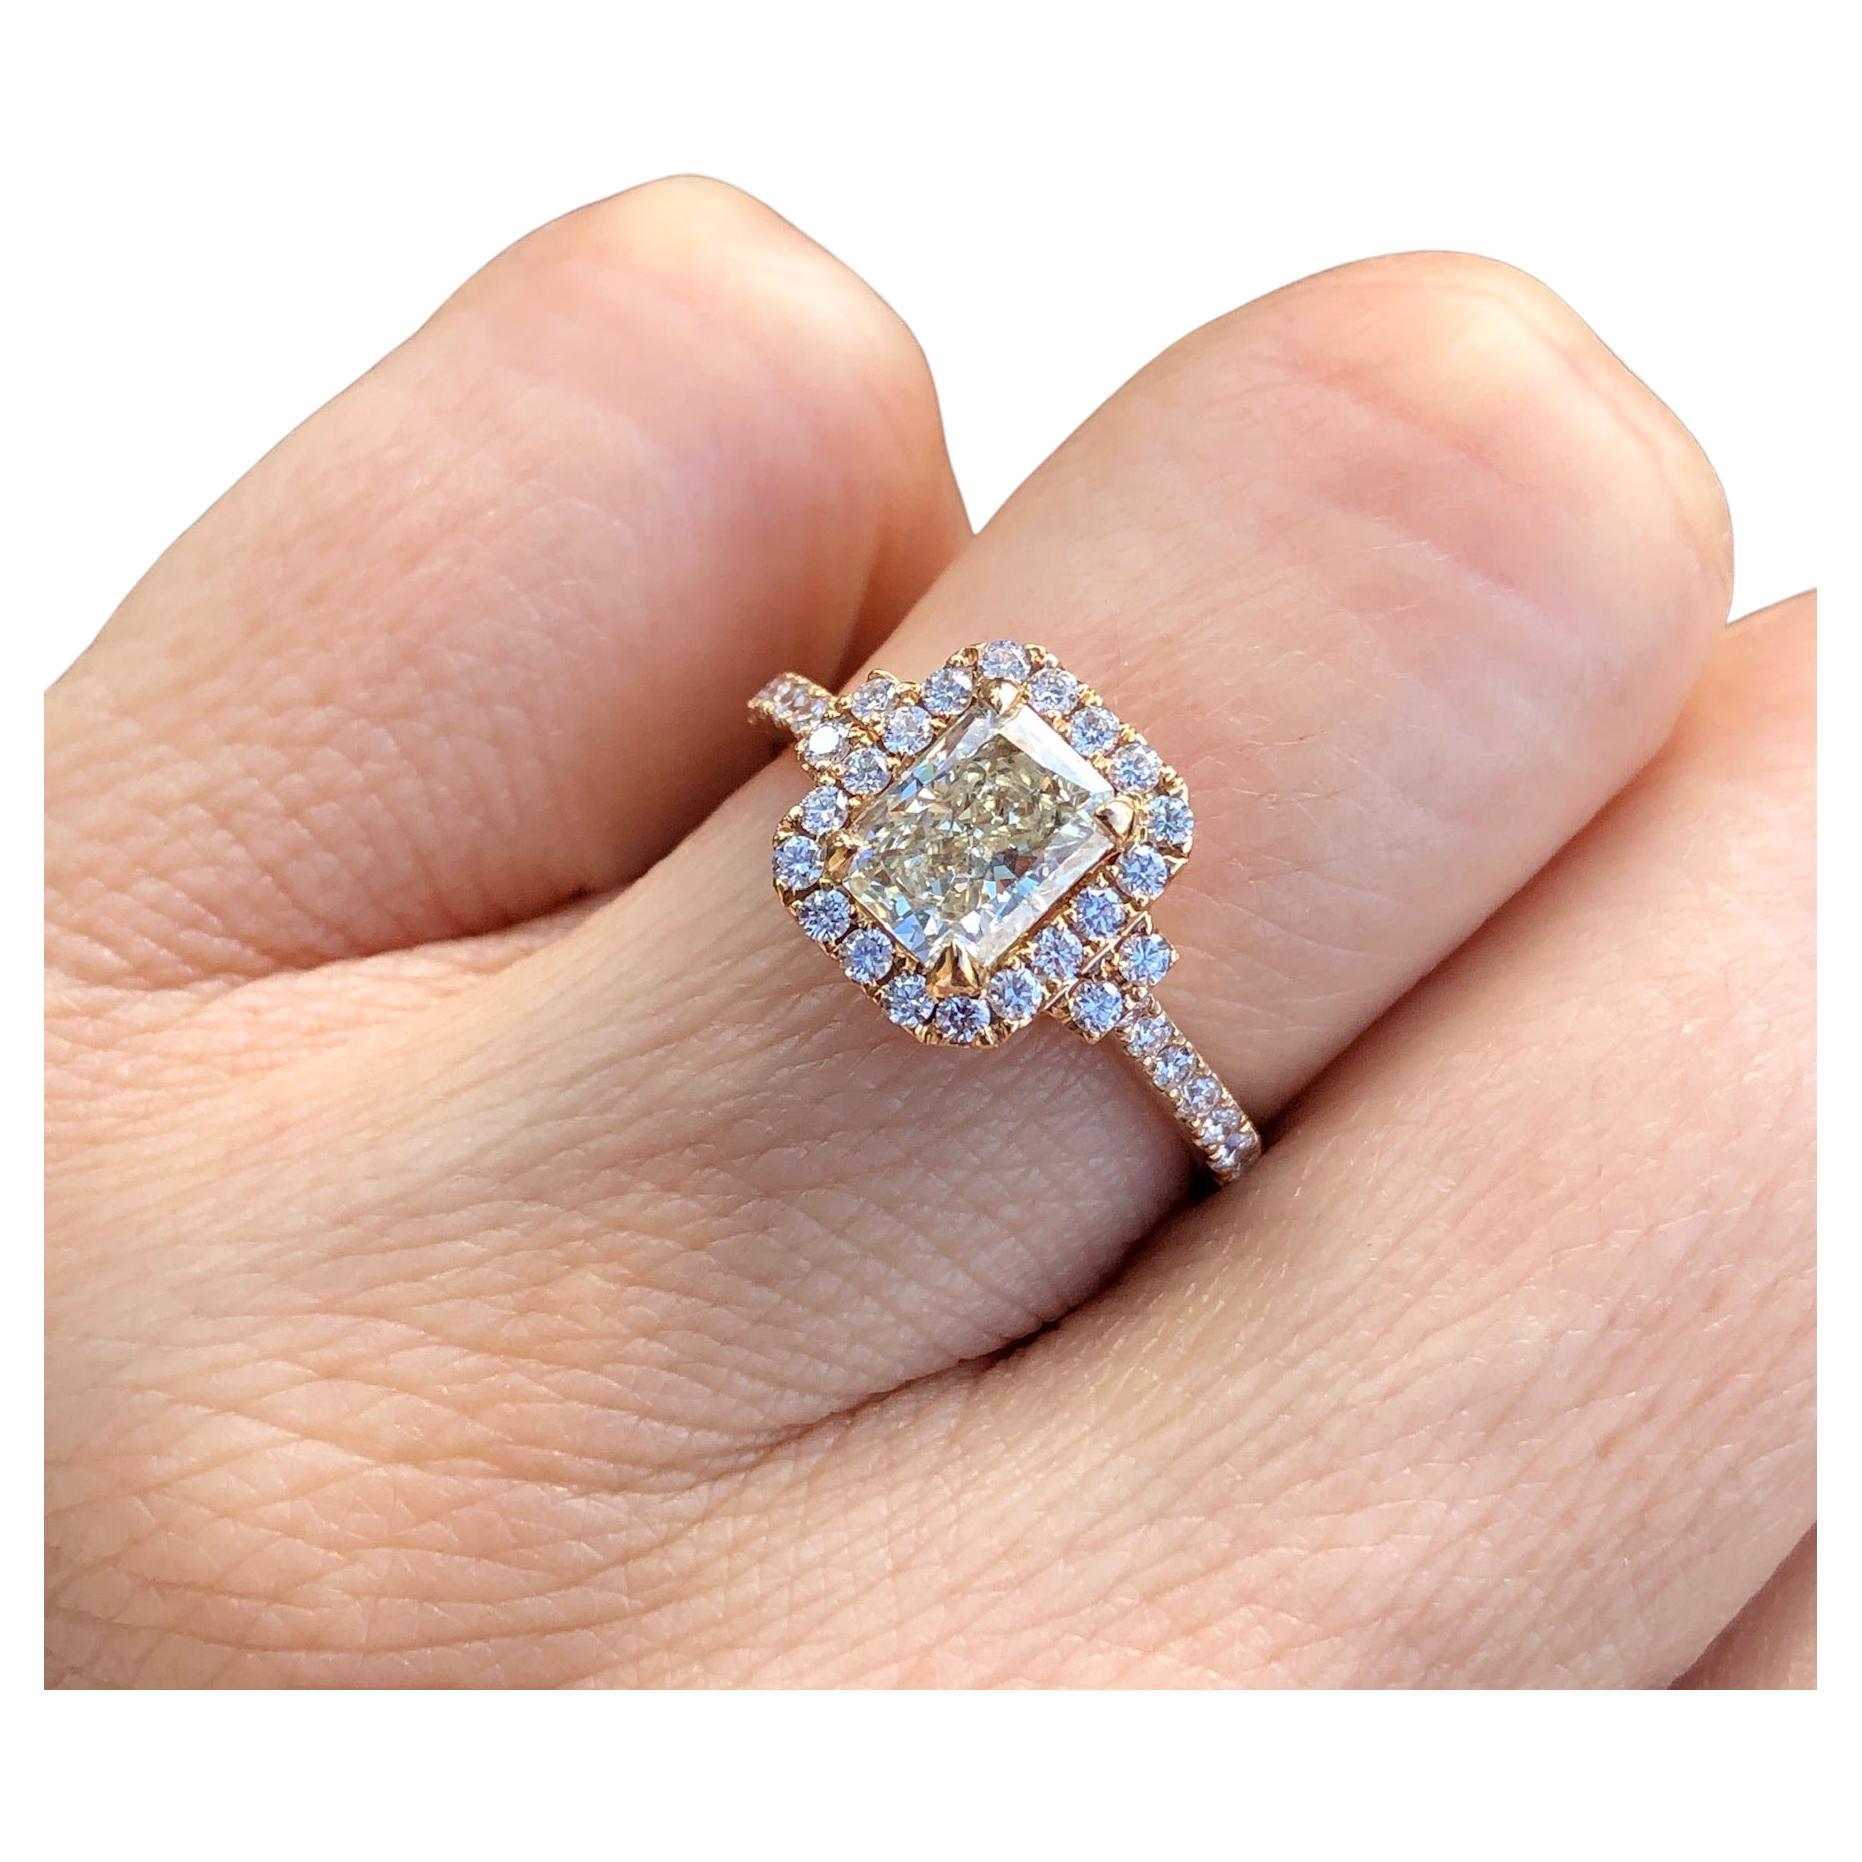 18K rose gold diamond engagement ring with radiant cut, pale yellow diamond on halo diamond mounting.

Features
18k rose gold
1.22 carat radiant cut, pale yellow diamond 
.40 carat total weight in white diamonds on the mounting
Ring size 7. Can be